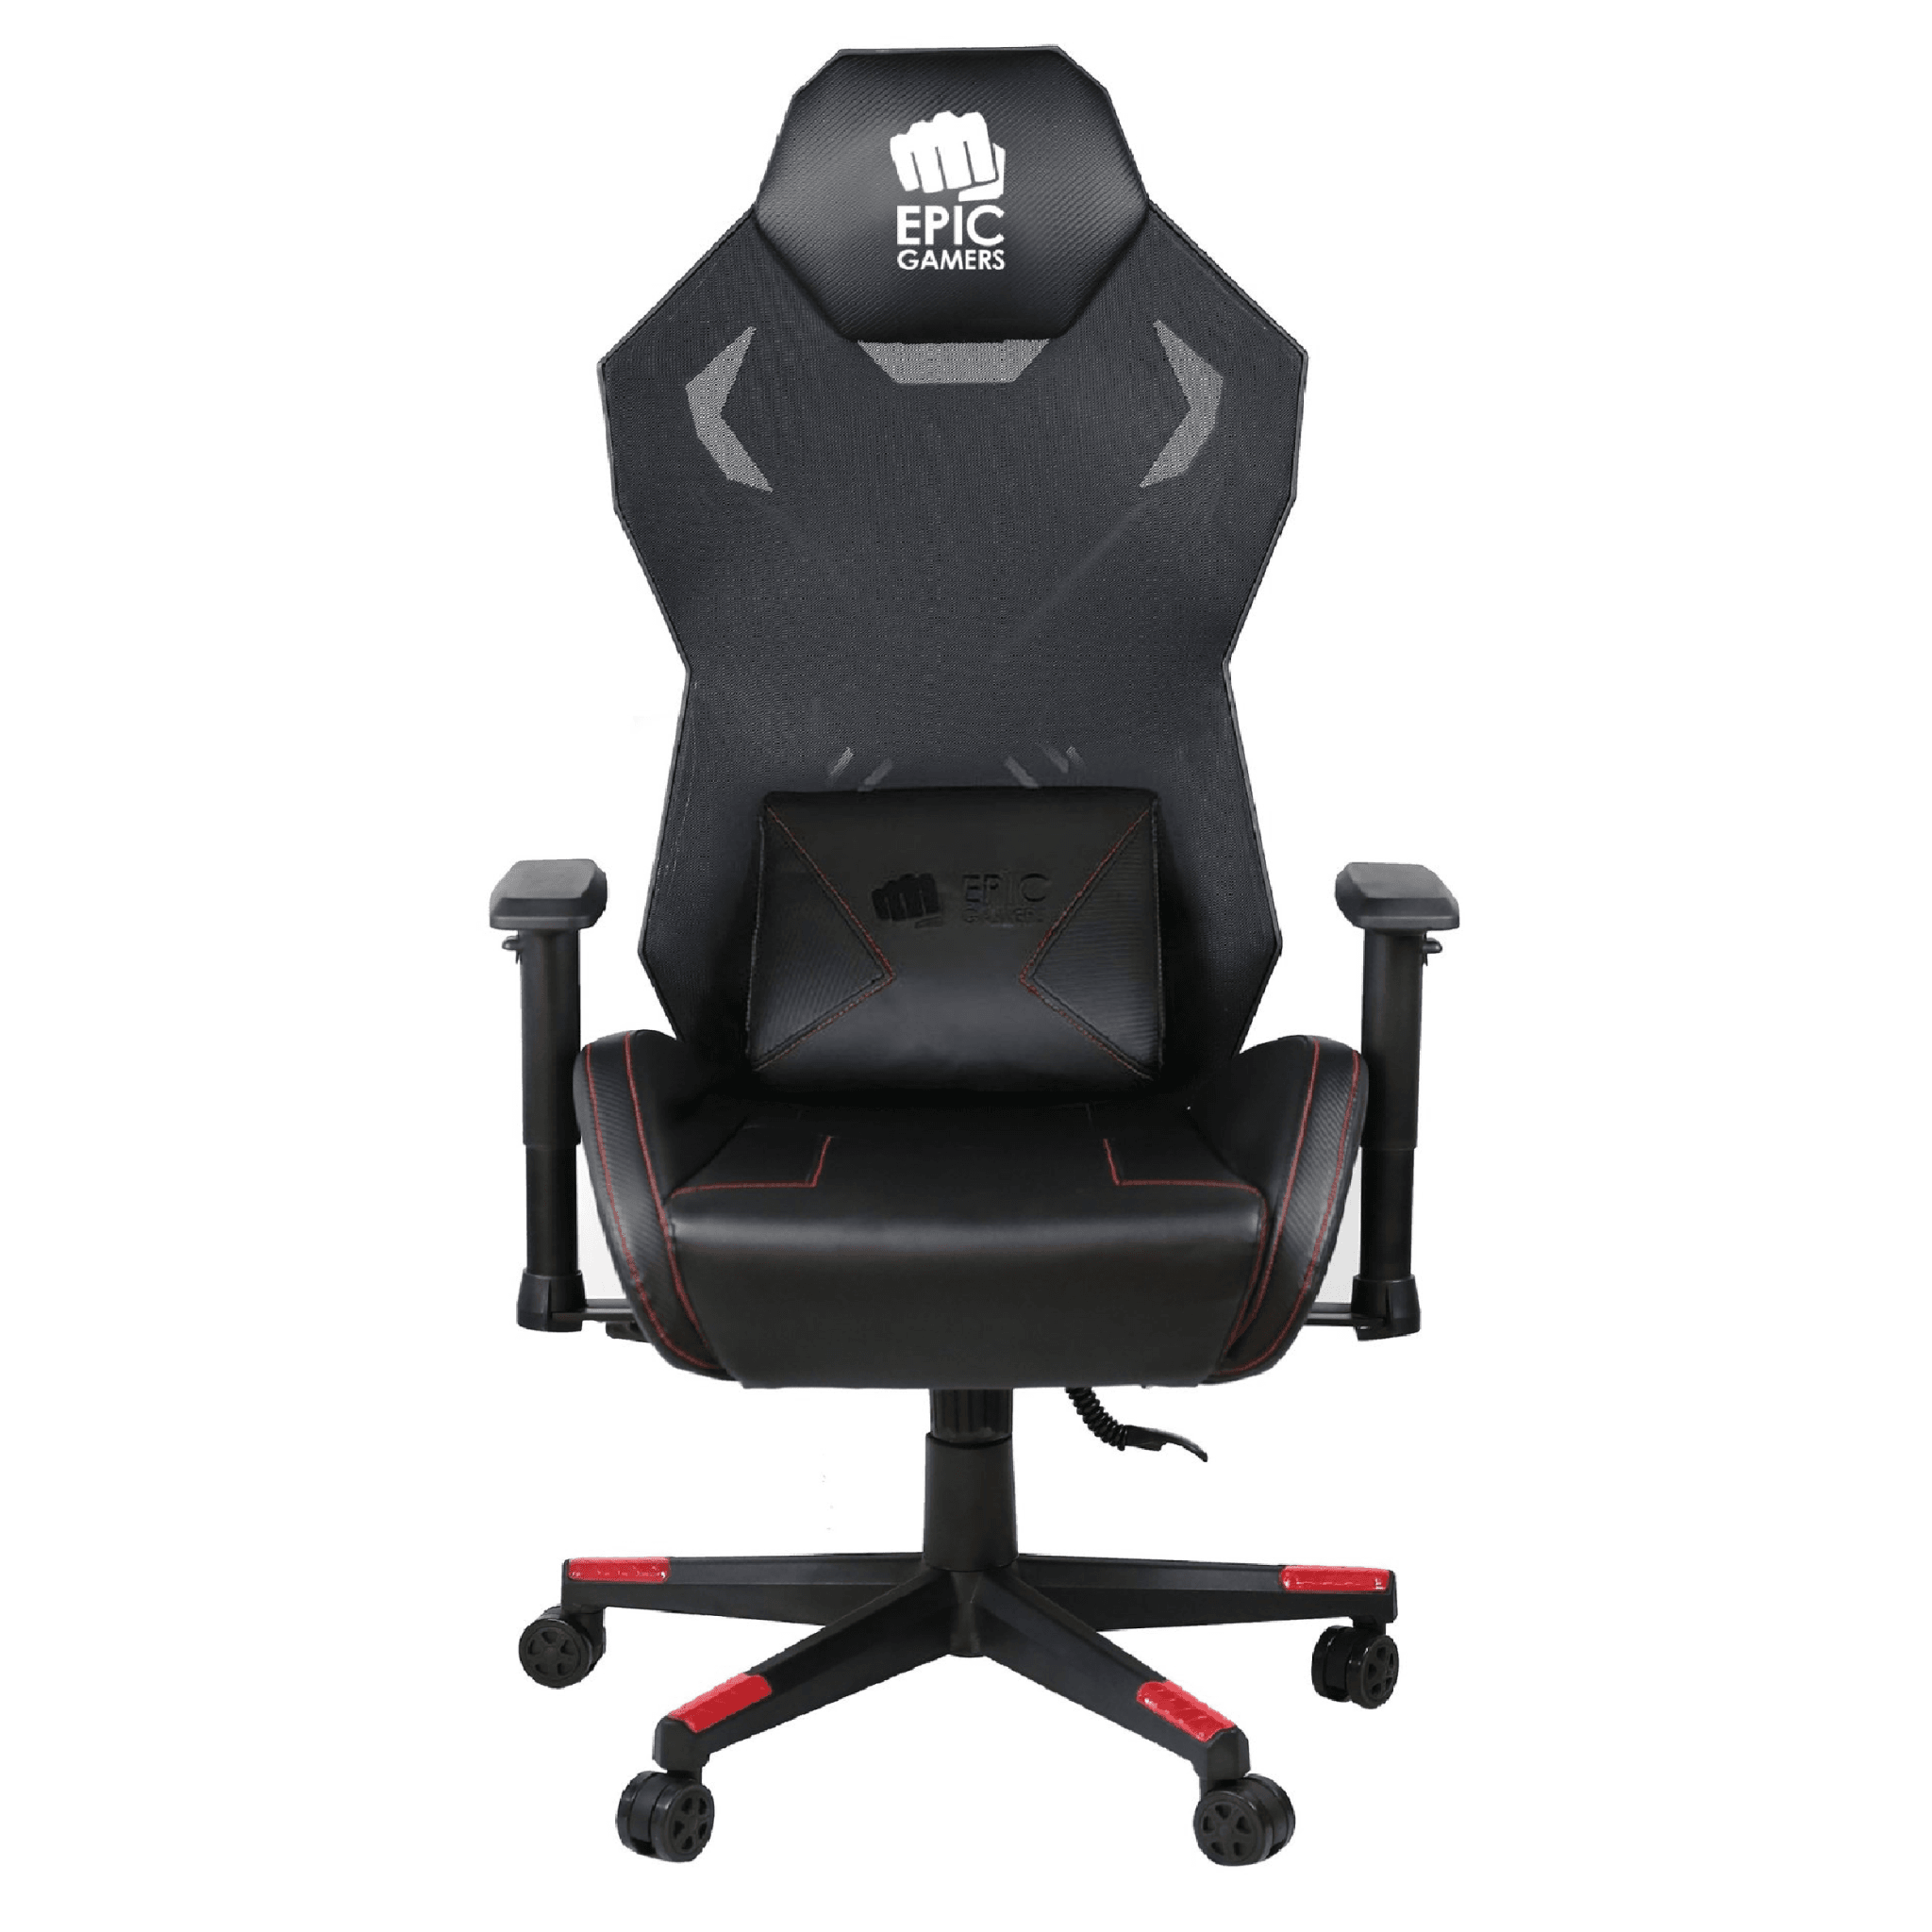 Epic Gamers Gaming Chair Model 2 - Black/Red - Store 974 | ستور ٩٧٤